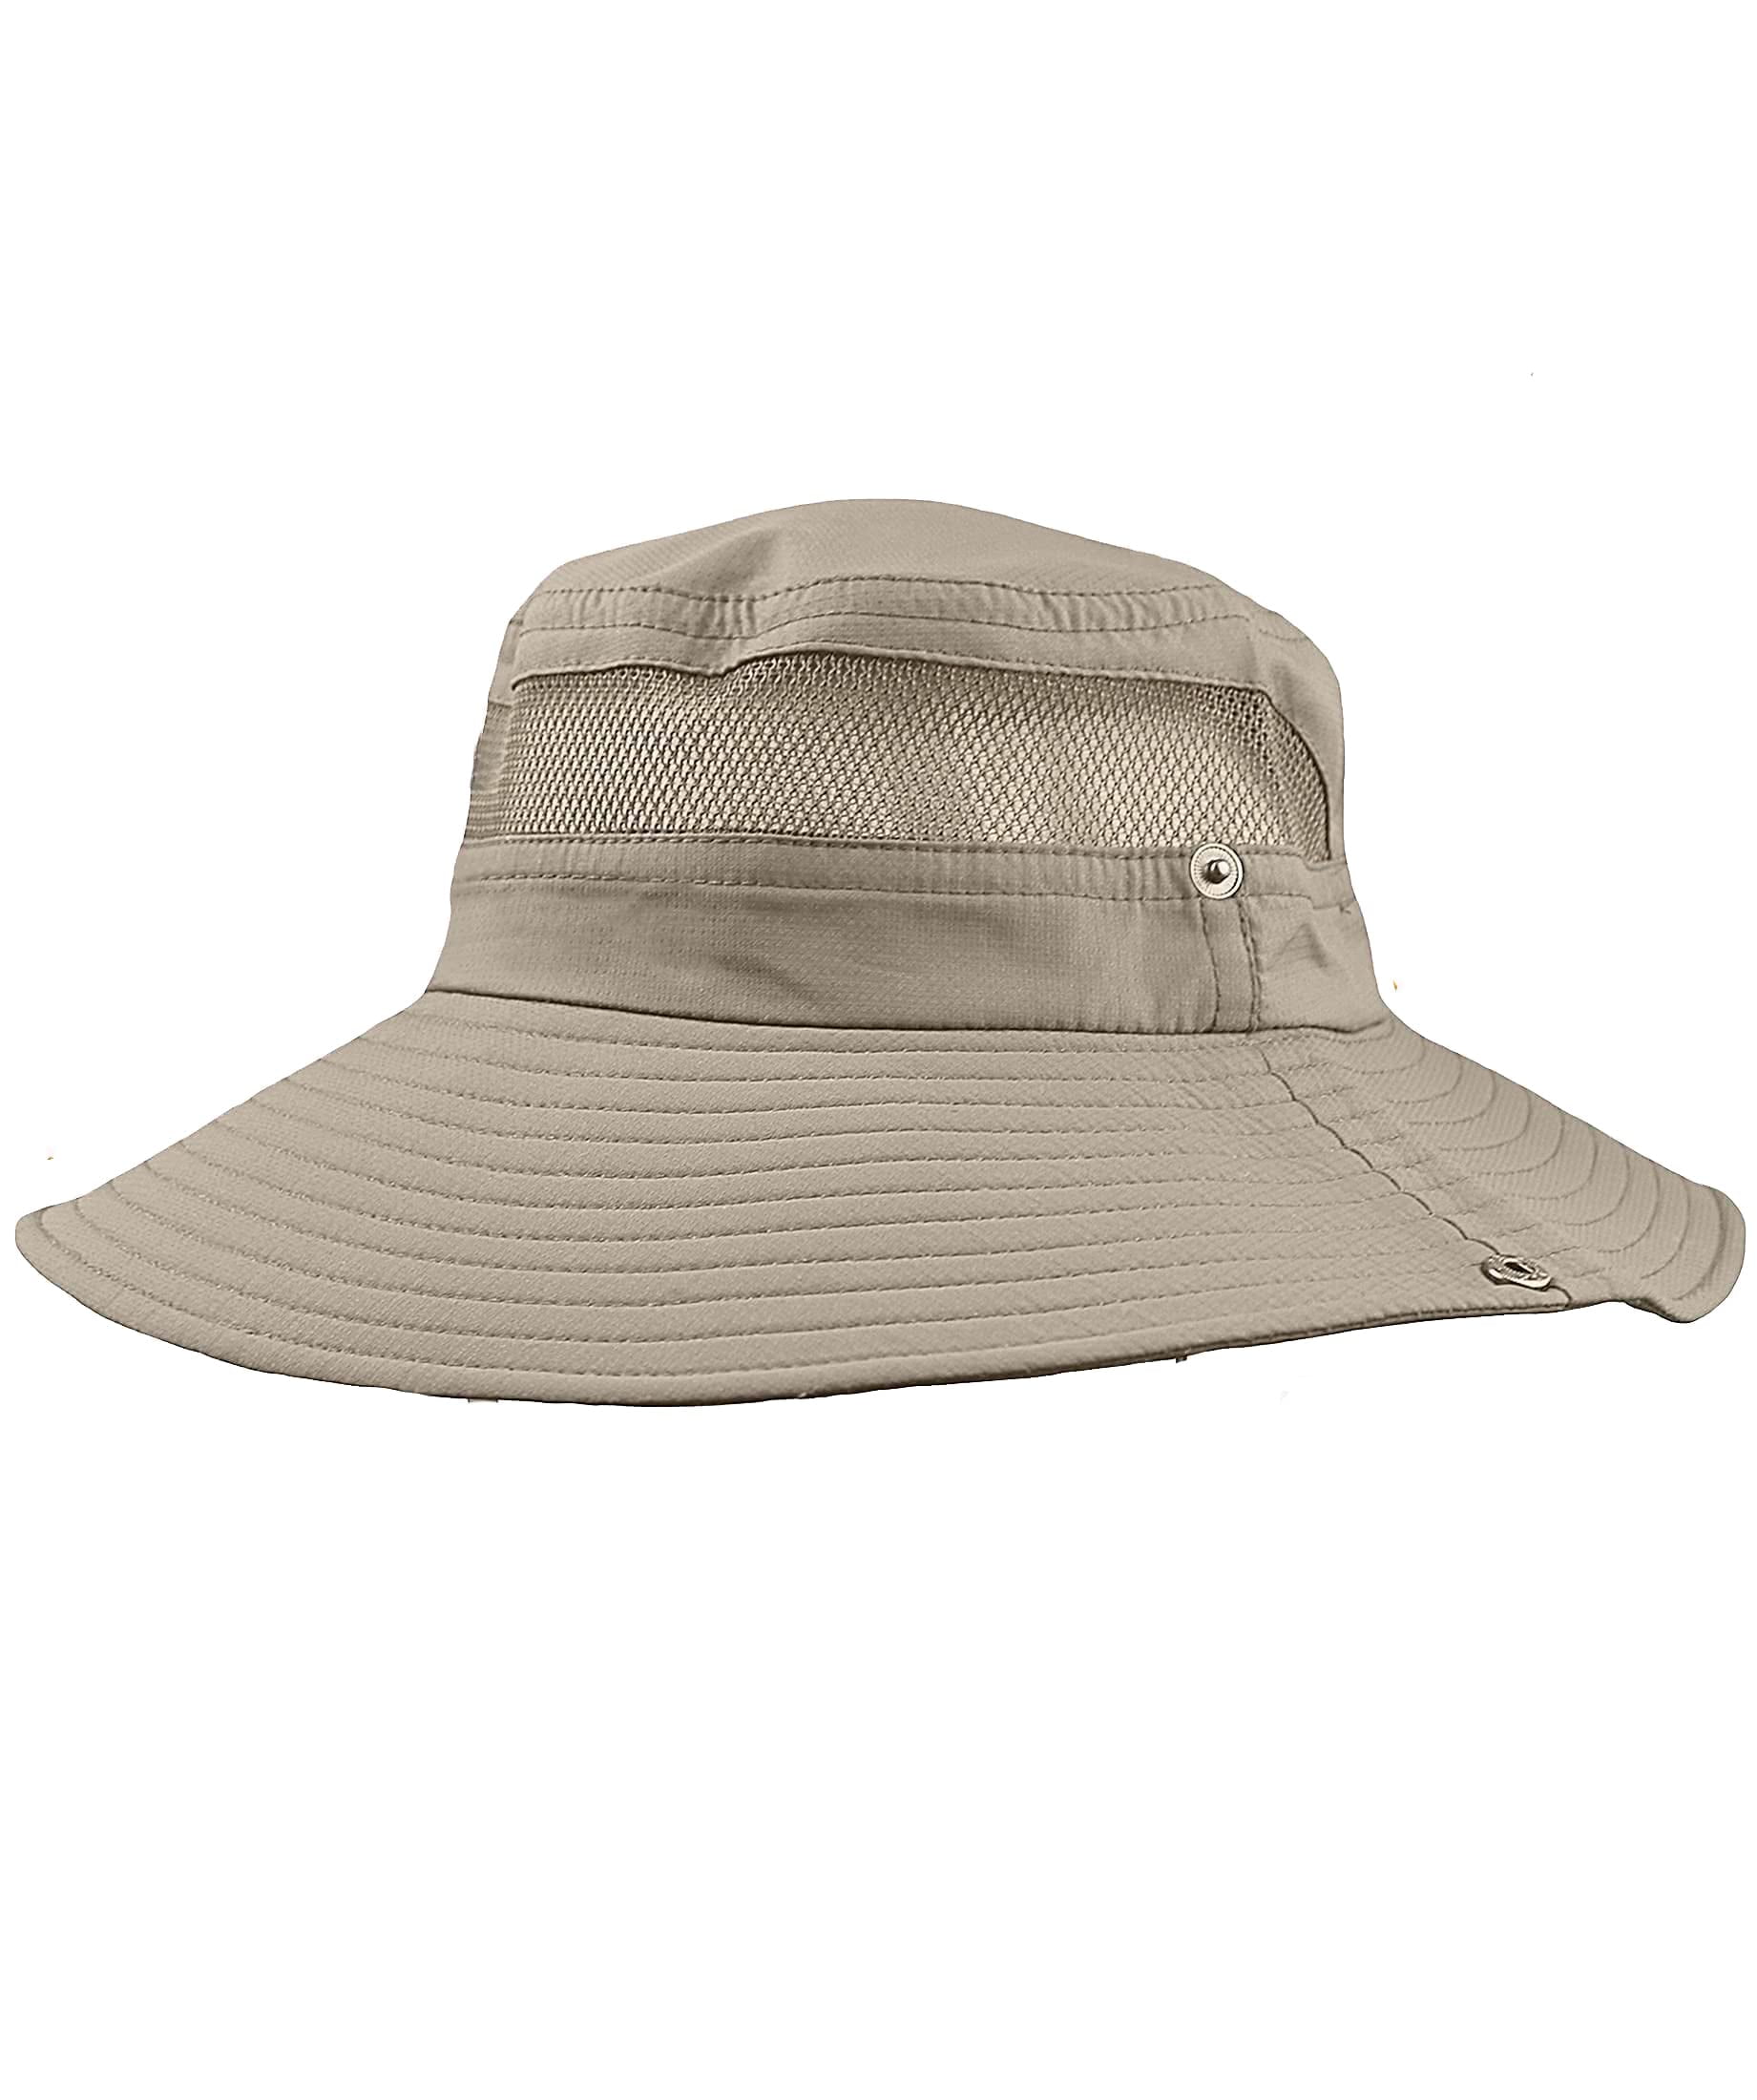 GearTOP Wide Brim Sun Hat for Men and Women - Mens Bucket Hats with UV  Protection for Hiking - Beach Hats for Women UPF 50+ (Beige, 7-7 1/2) 